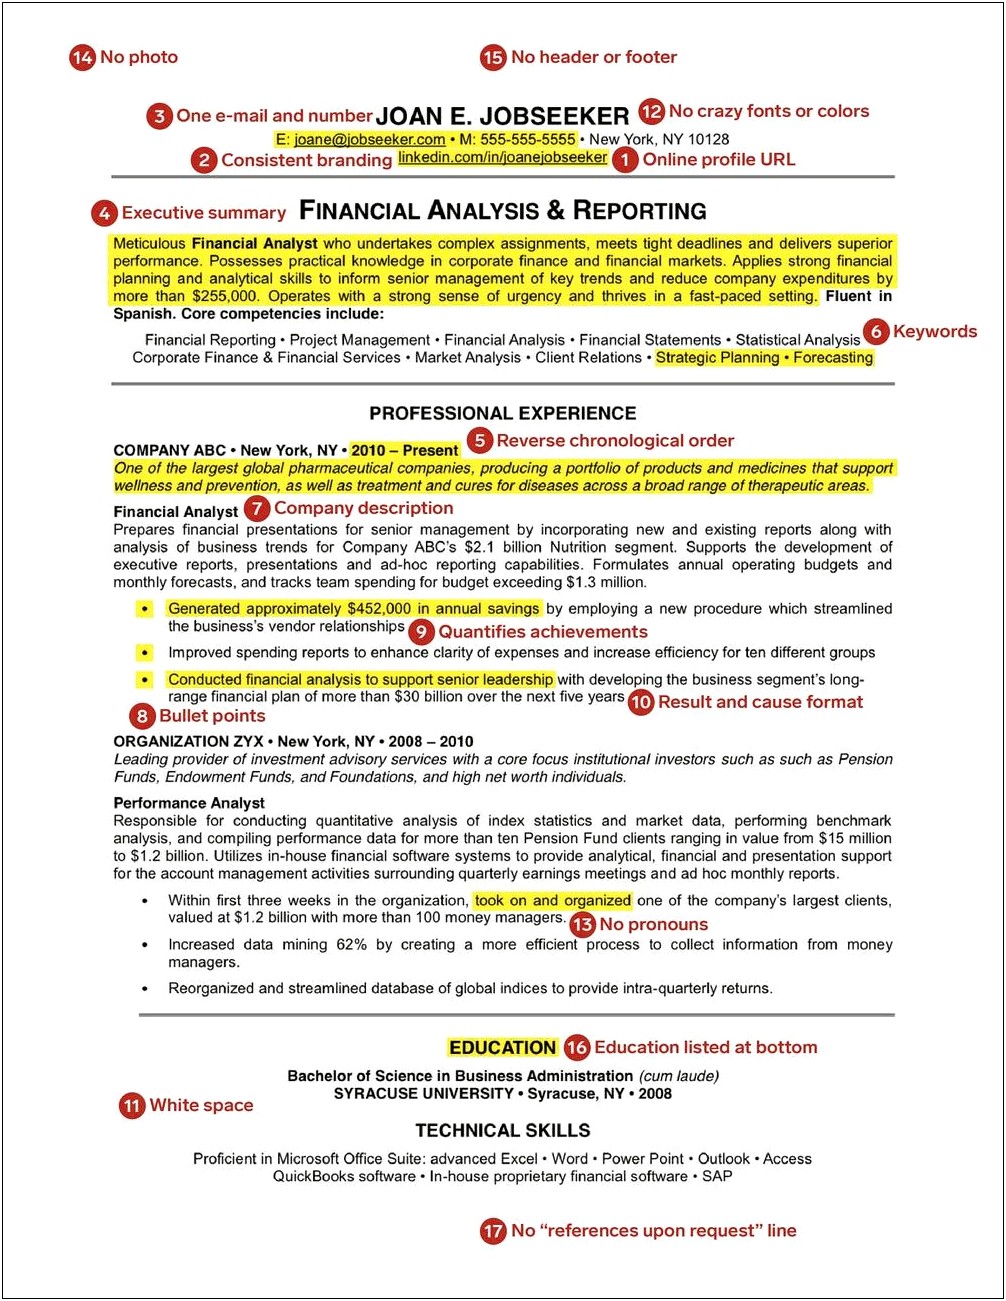 Best Resumes For People In Marketing Analysis